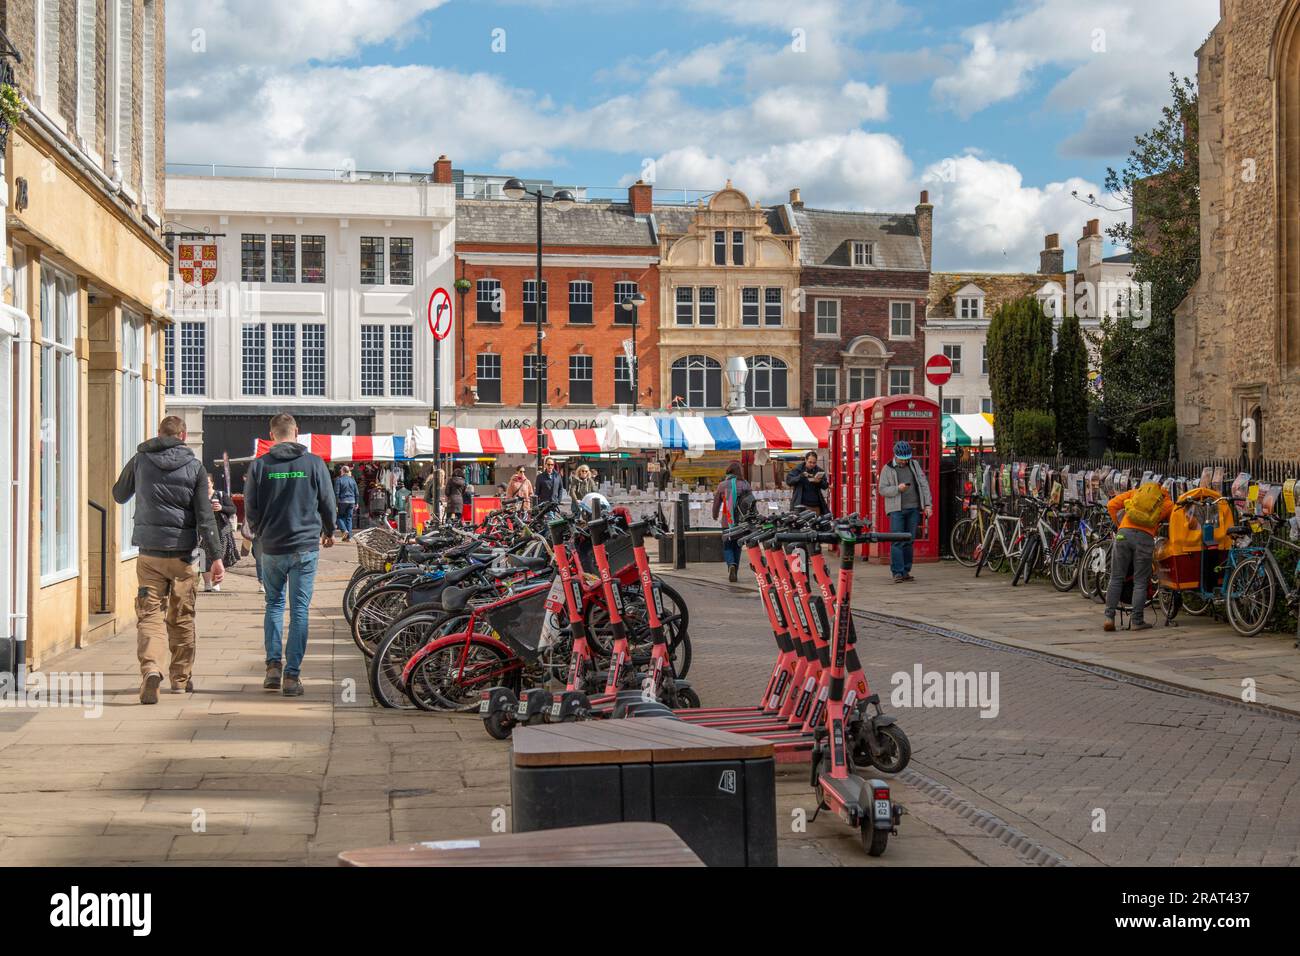 Voi electric rental scooters parked near Cambridge market, UK. Stock Photo